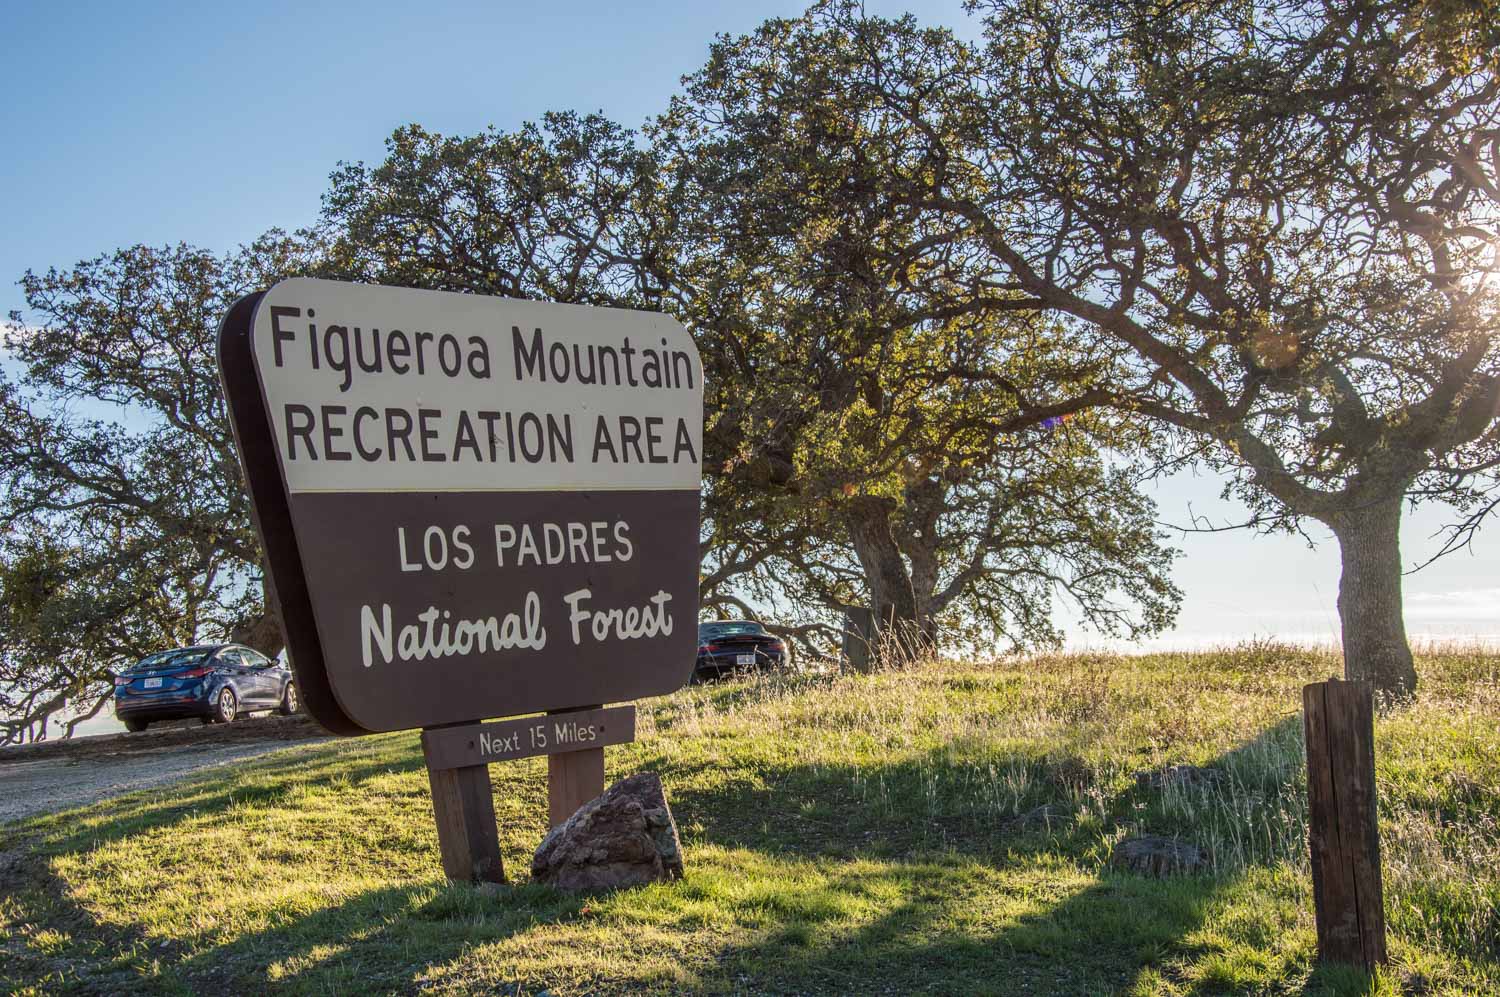 Los Padres National Forest lifts fire restrictions